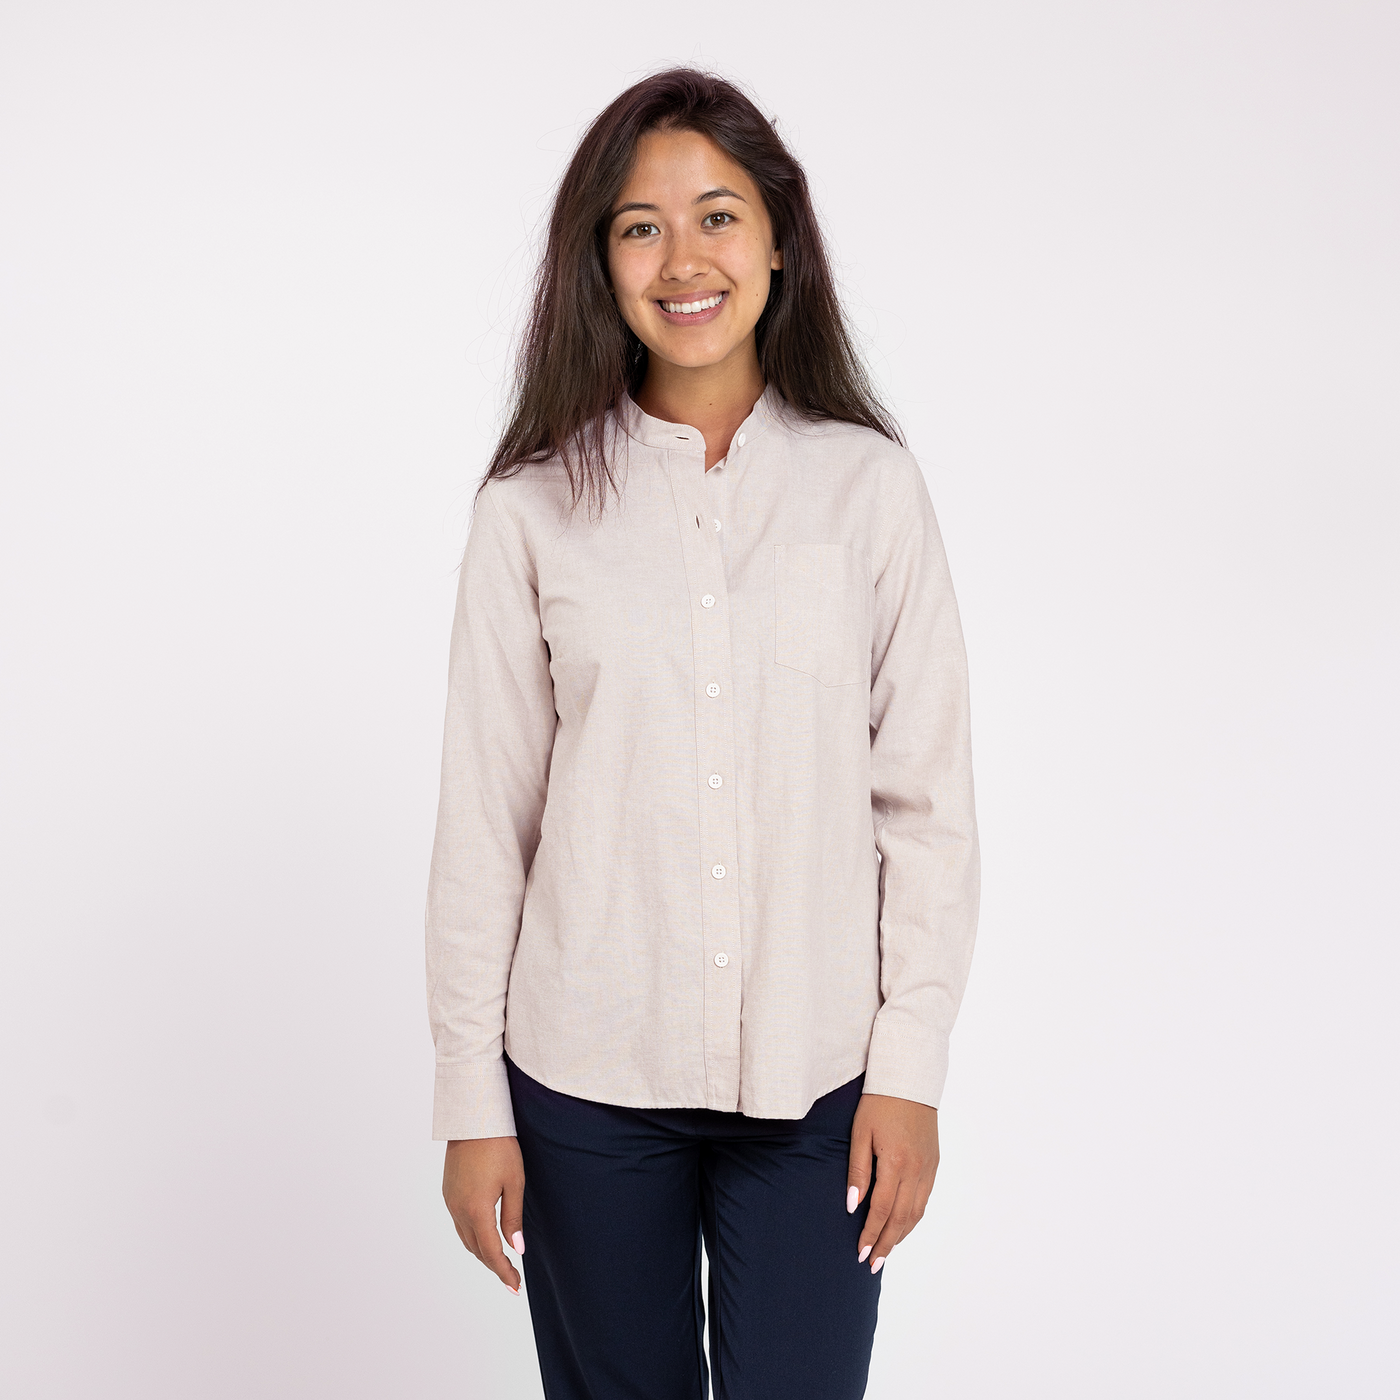 Women's Wheat Banded Collar Service Oxford